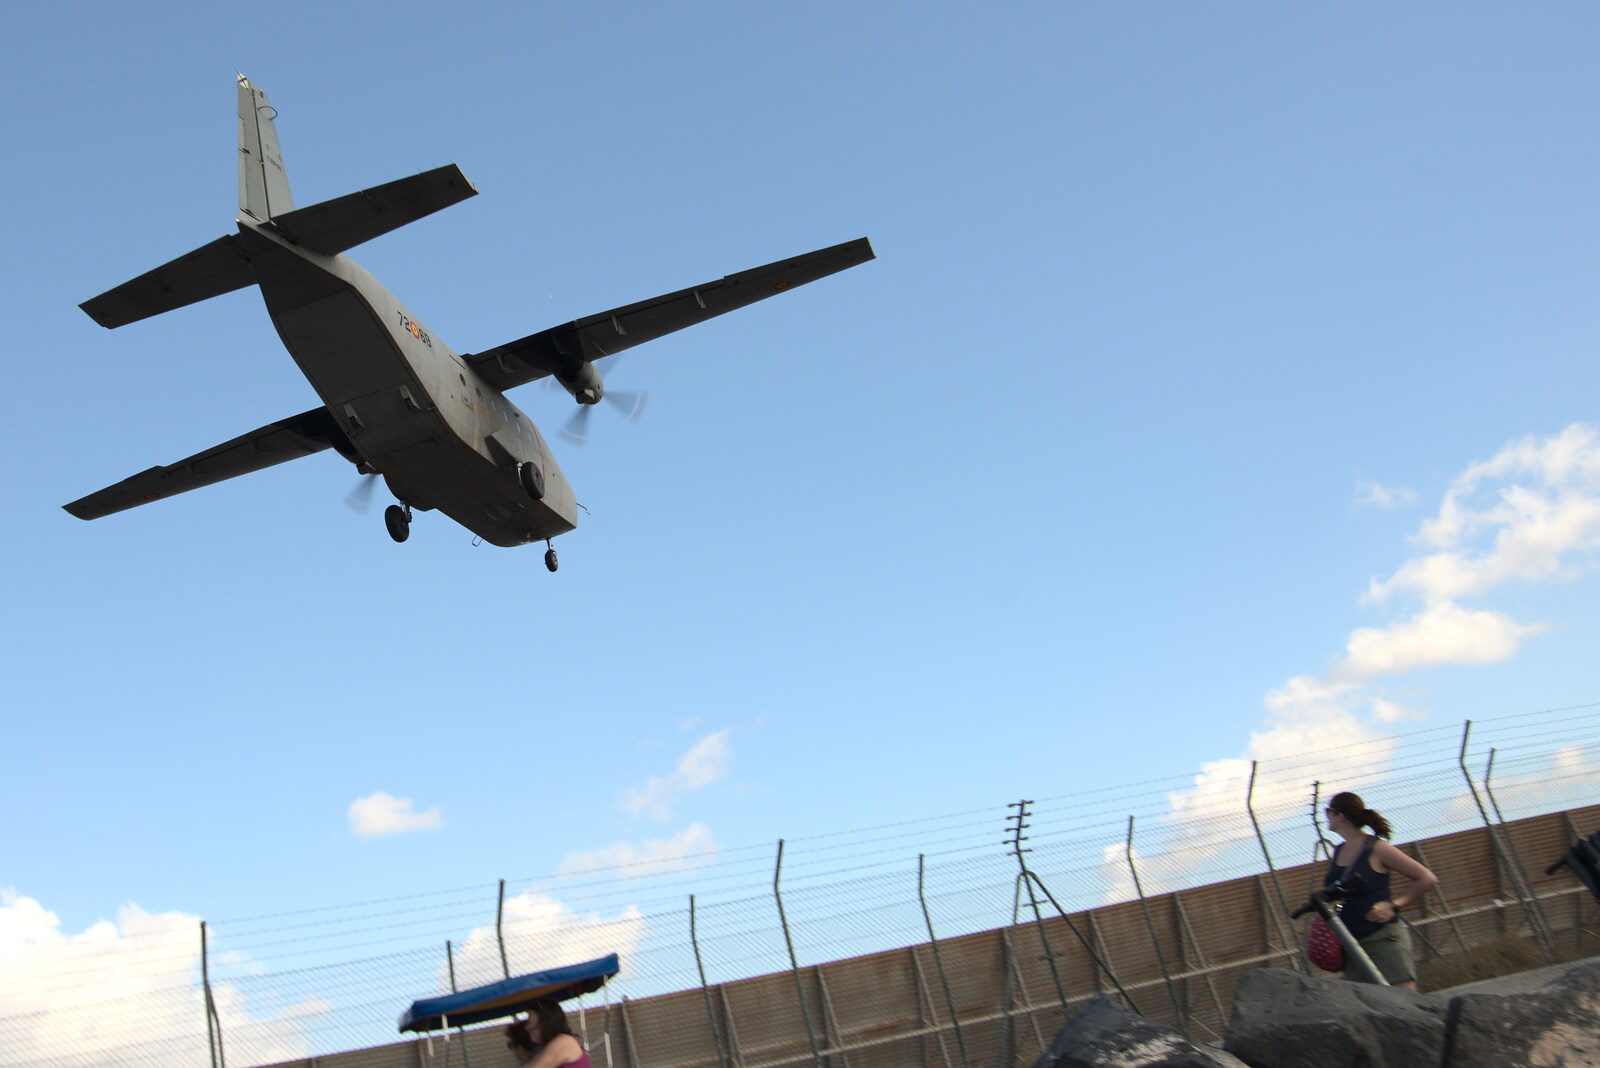 An army cargo plane comes in to land from Five Days in Lanzarote, Canary Islands, Spain - 24th October 2021